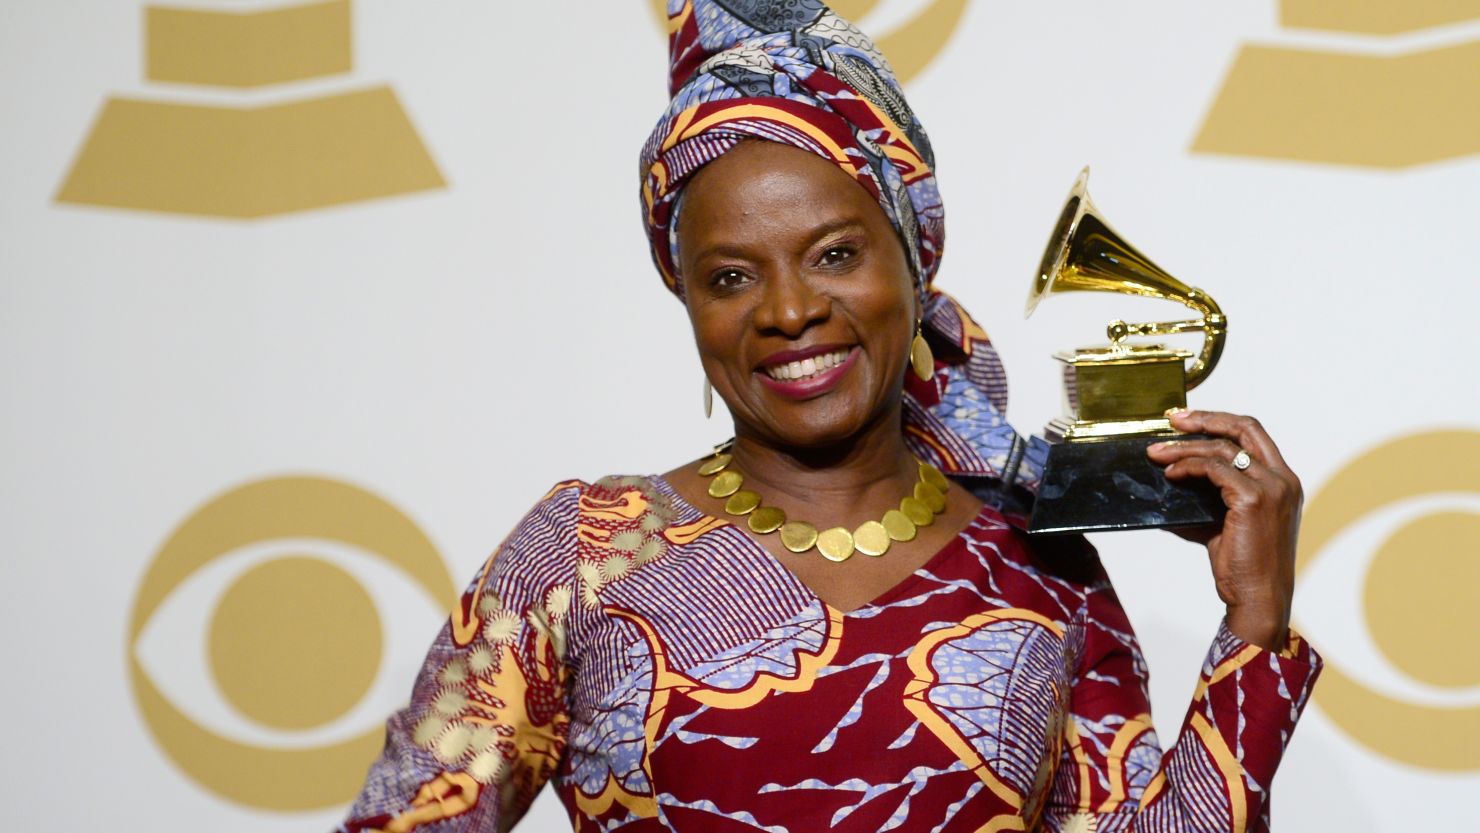 Angelique Kidjo celebrates her win for "Best World Music Album" at the 57th Annual Grammy Awards at the Staples Center on February 8, 2015 in Los Angeles, California. 